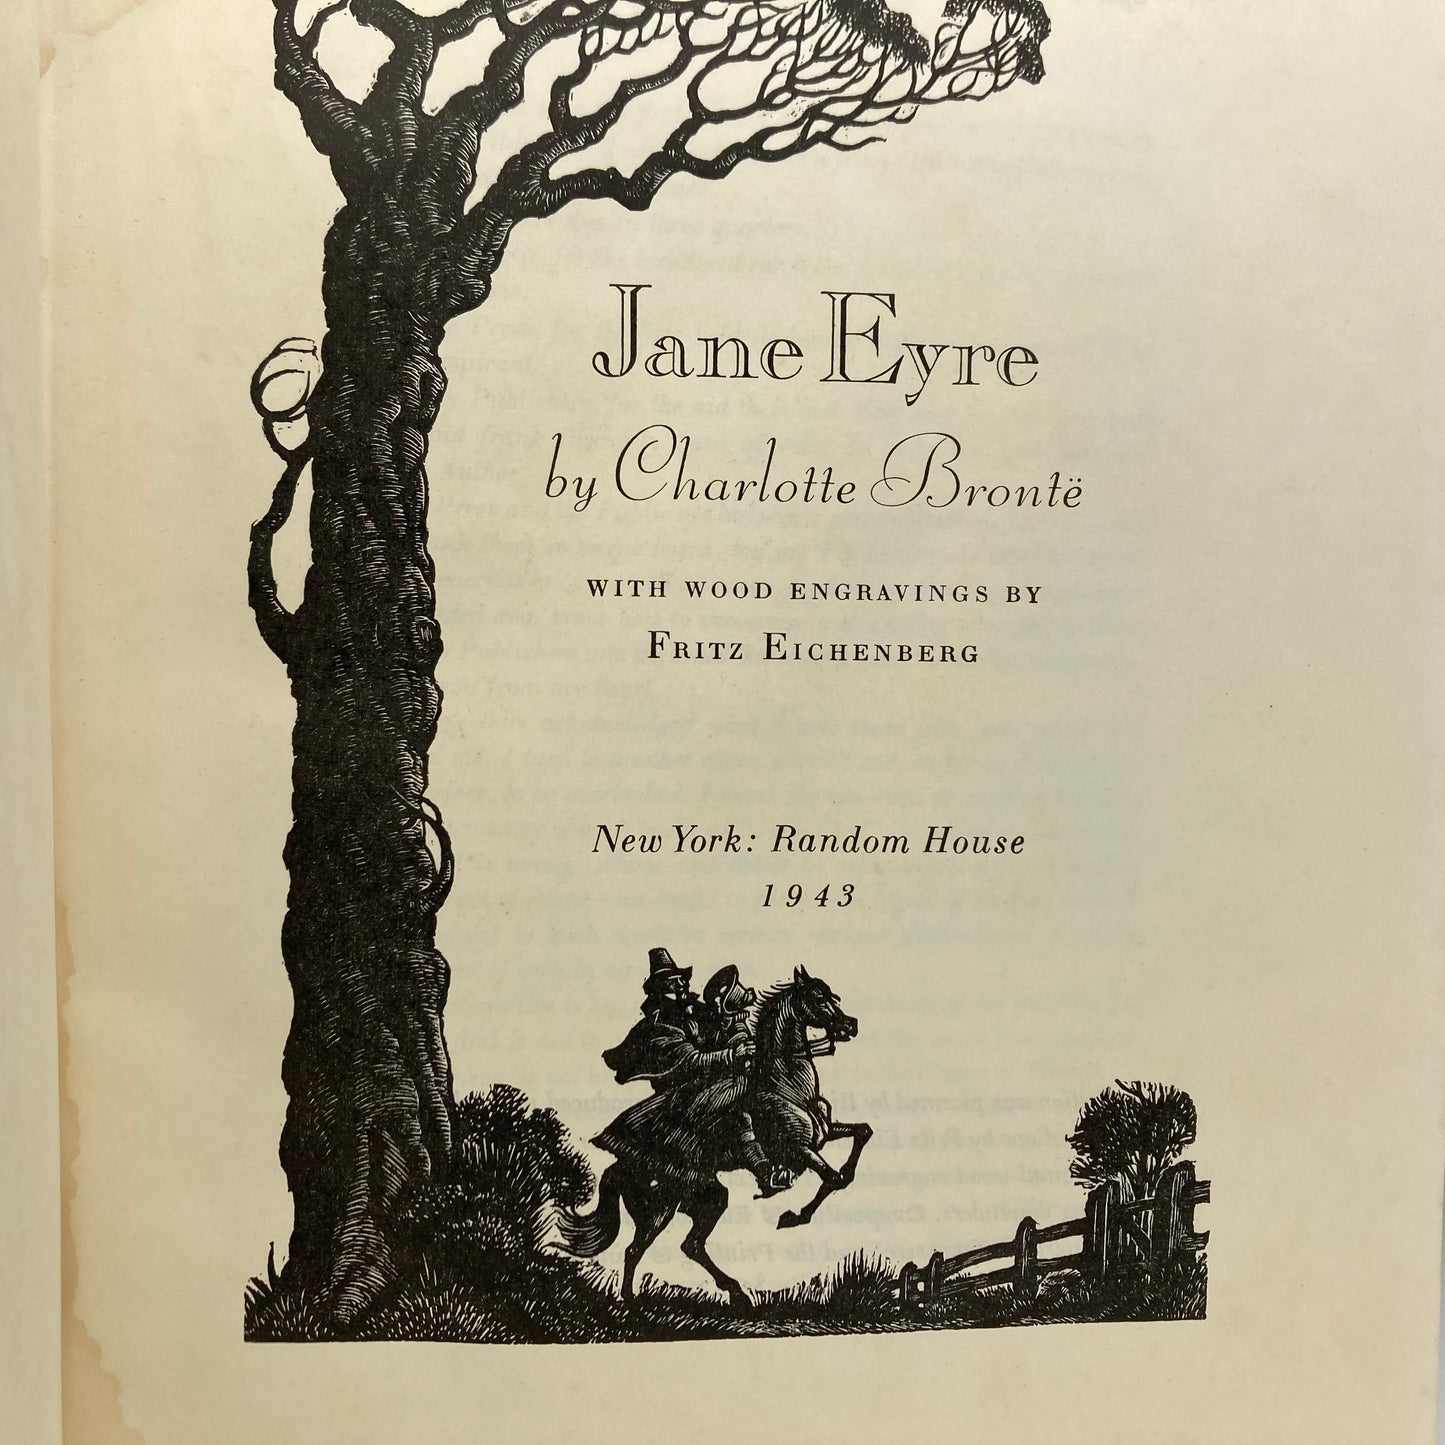 BRONTE, Charlotte/Emily "Jane Eyre"/"Wuthering Heights" [Random House, 1943]